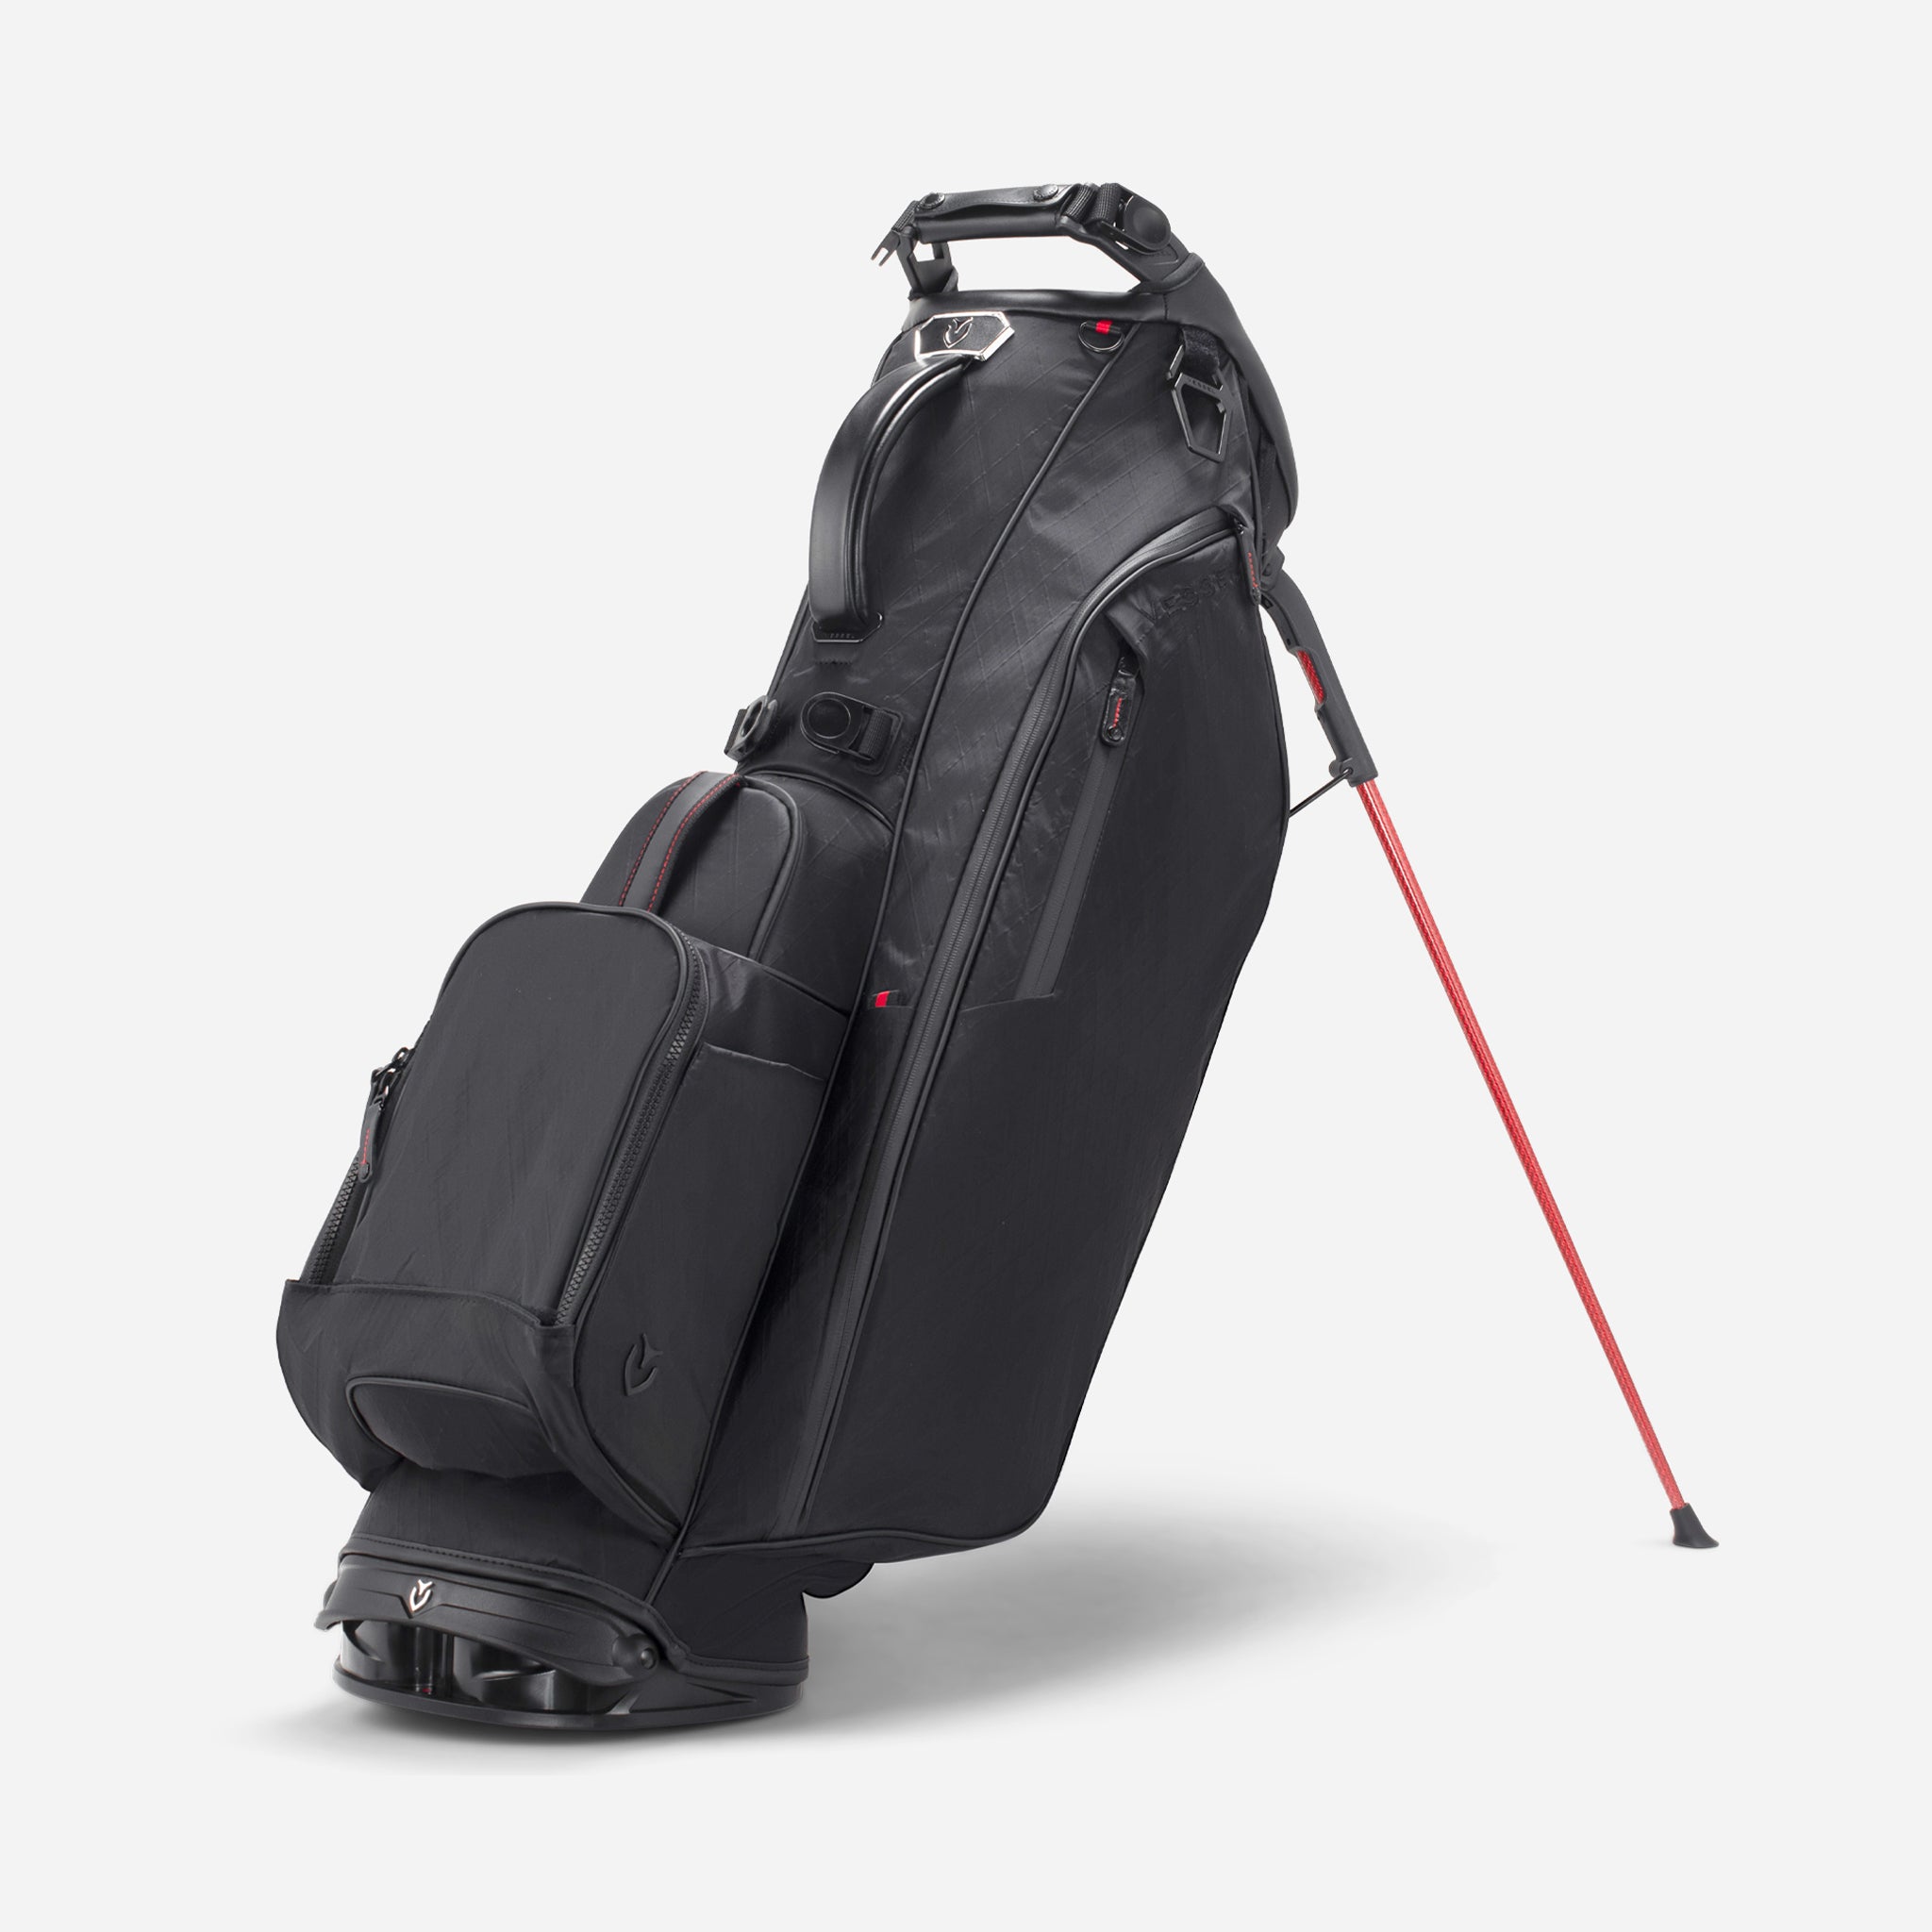 Vessel PLAYER III STAND (3.0) - Golf Bags/Carts/Headcovers - GolfWRX